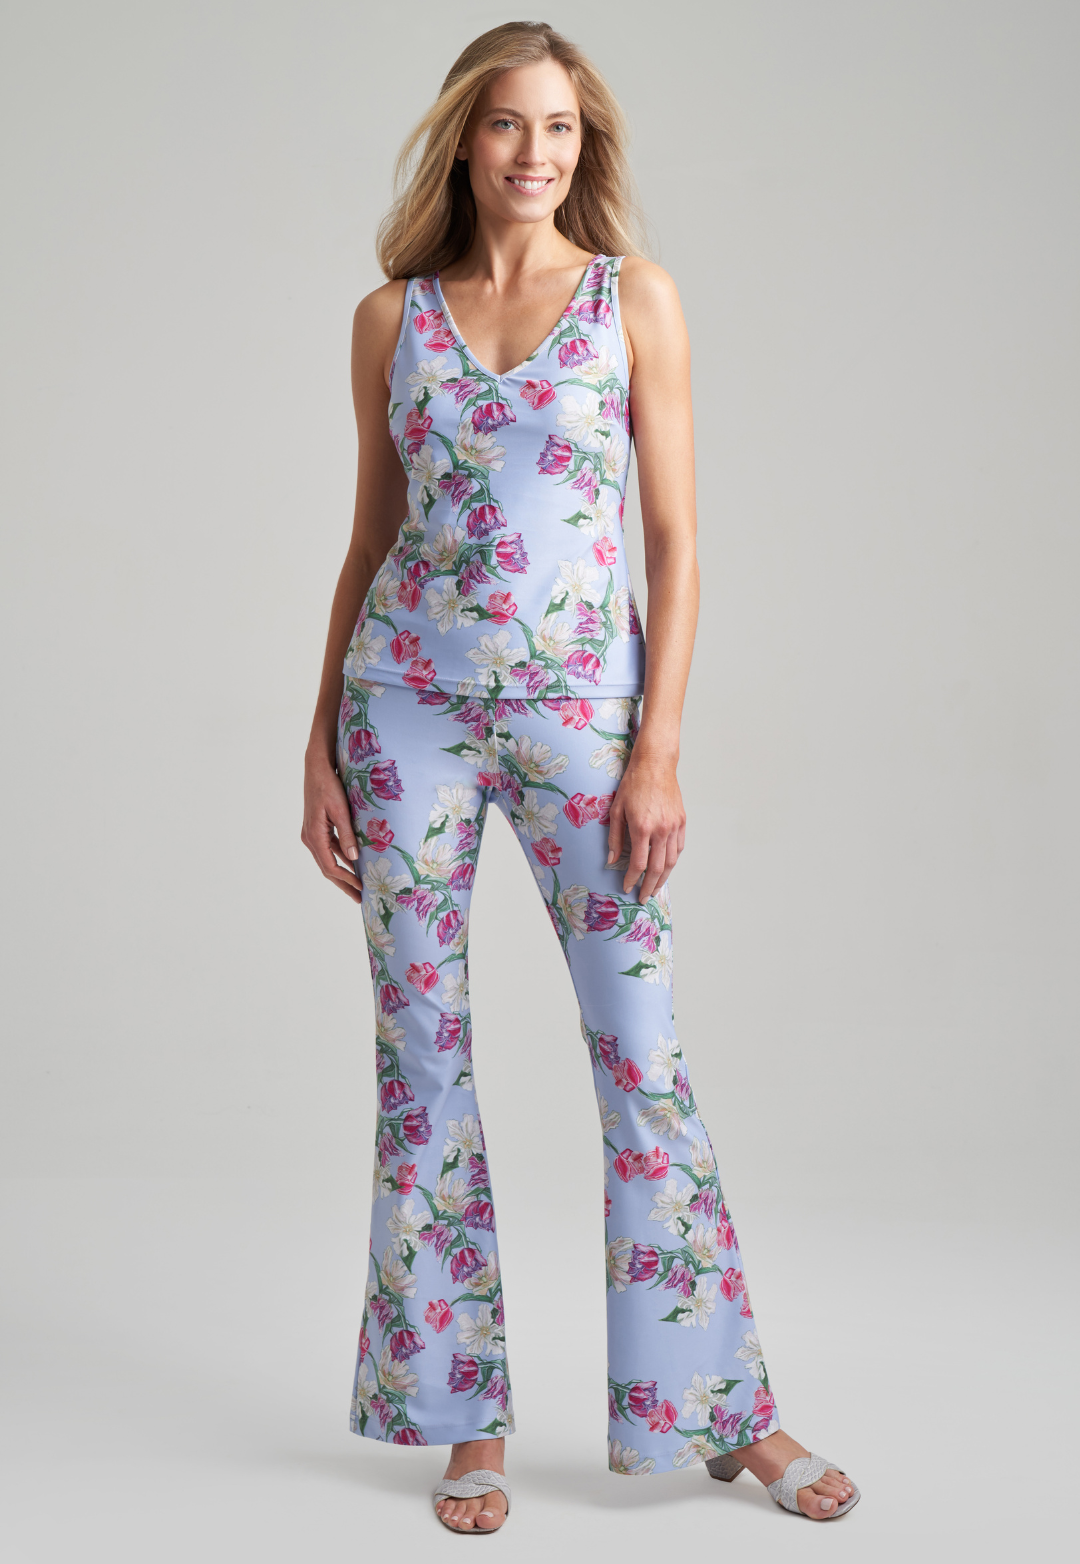 Woman wearing stretch knit tulip printed tank top with stretch knit pants in tulips by Ala von Auersperg for spring summer 2021